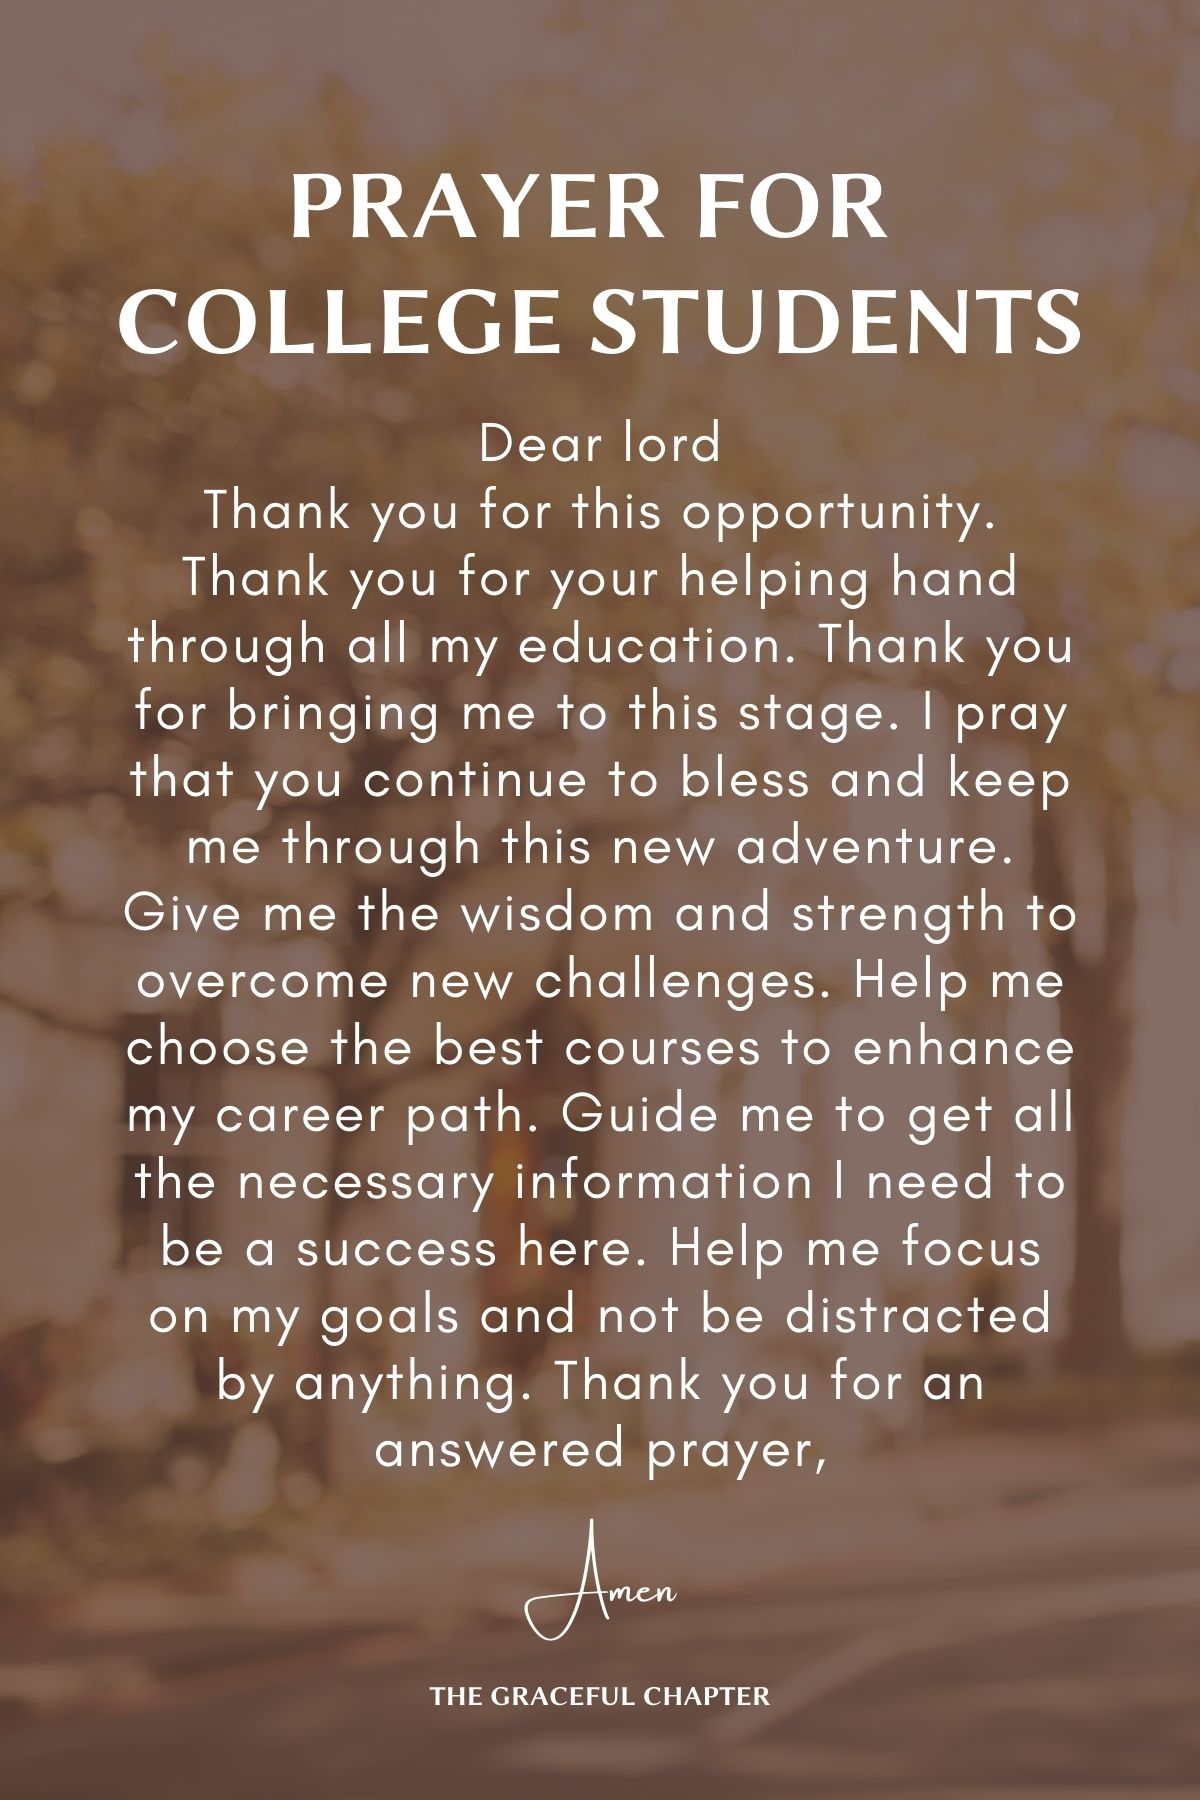 Prayer for college students